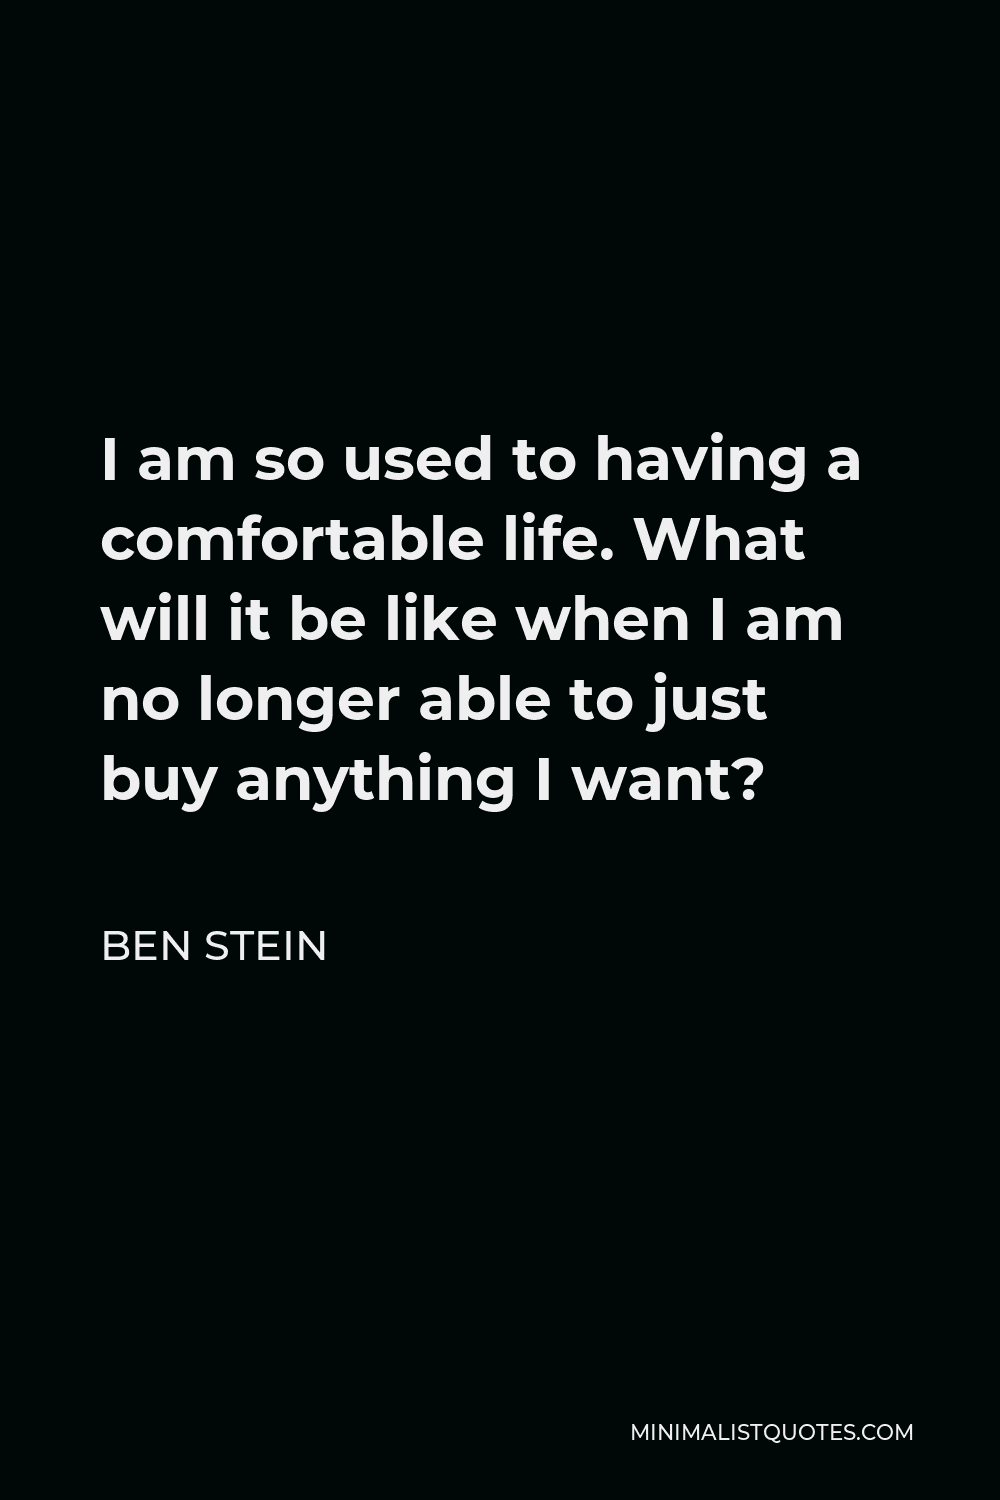 Ben Stein Quote - I am so used to having a comfortable life. What will it be like when I am no longer able to just buy anything I want?